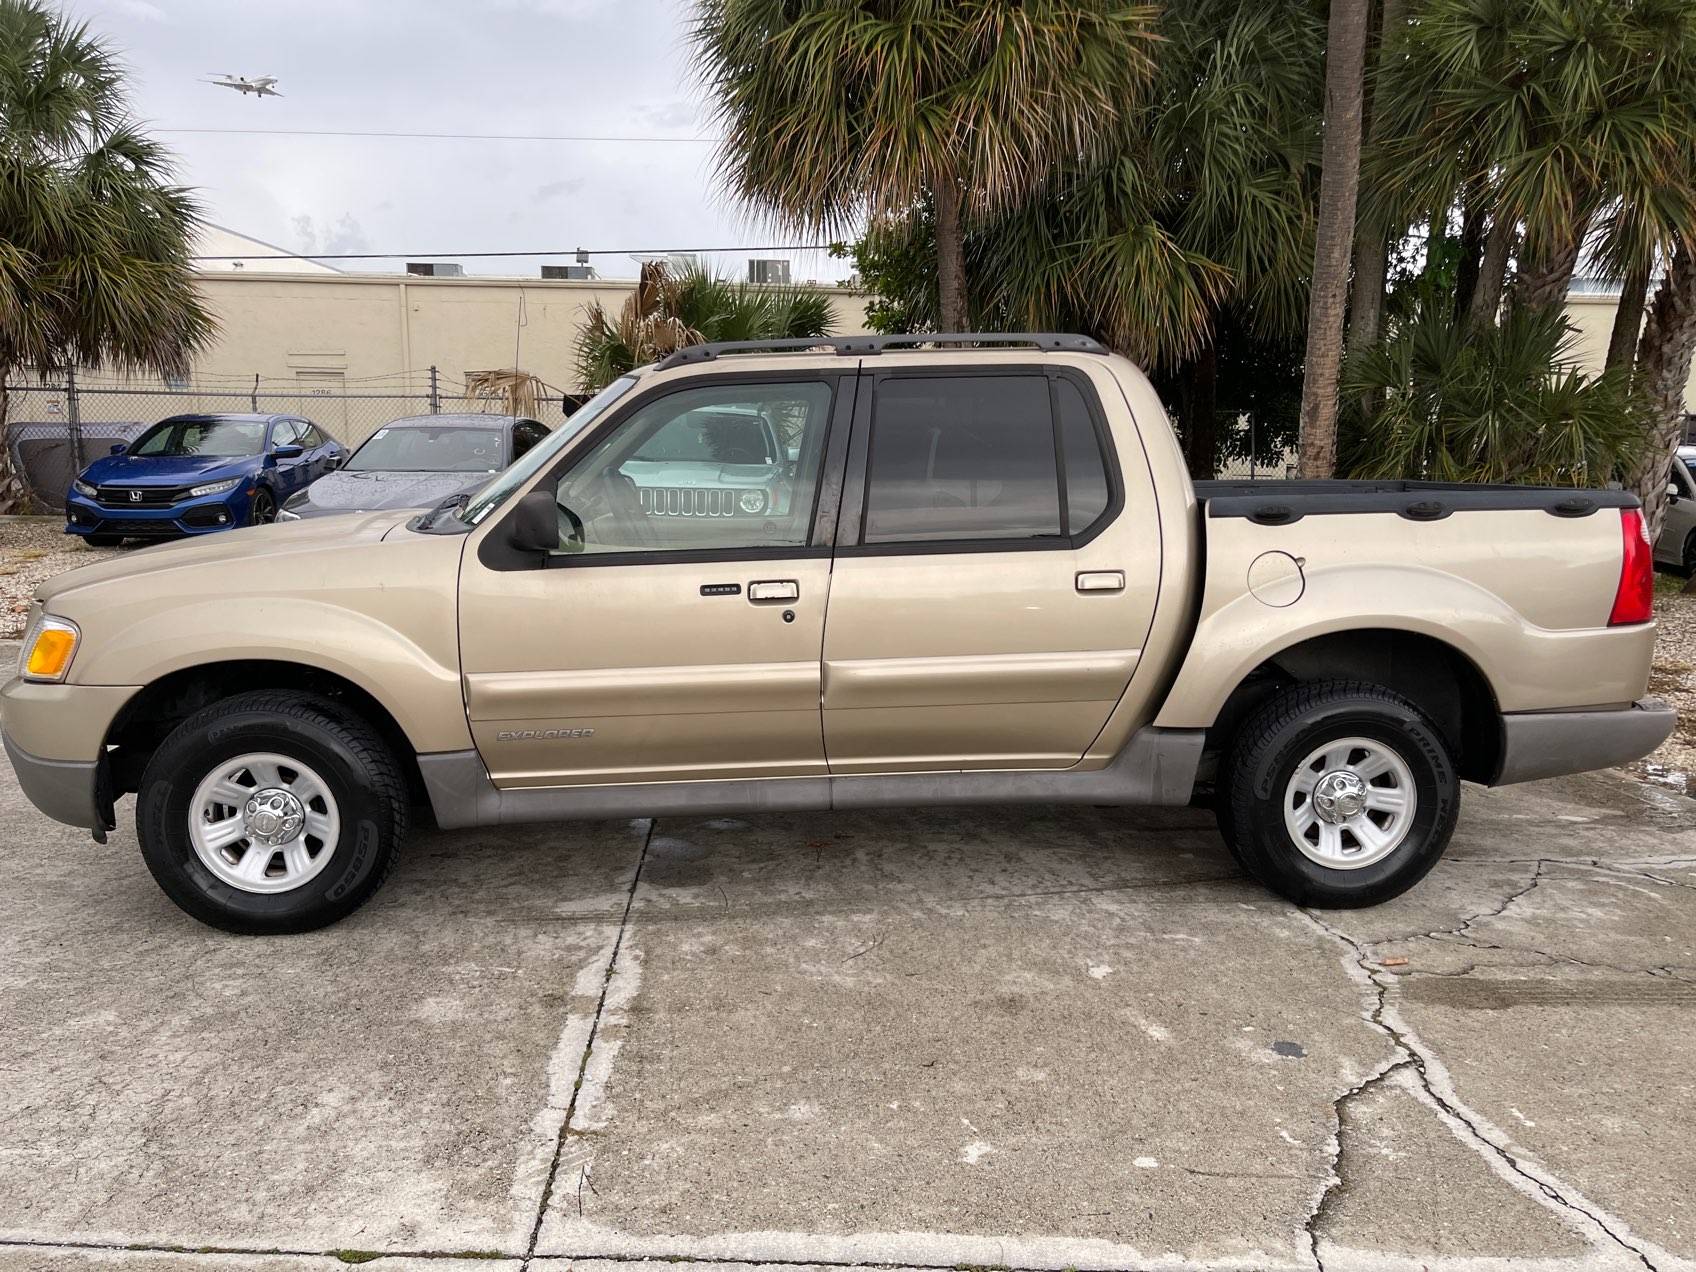 Used 2001 FORD EXPLORER SPORT TRAC SELECT TRIM for sale in WEST PALM |  122377